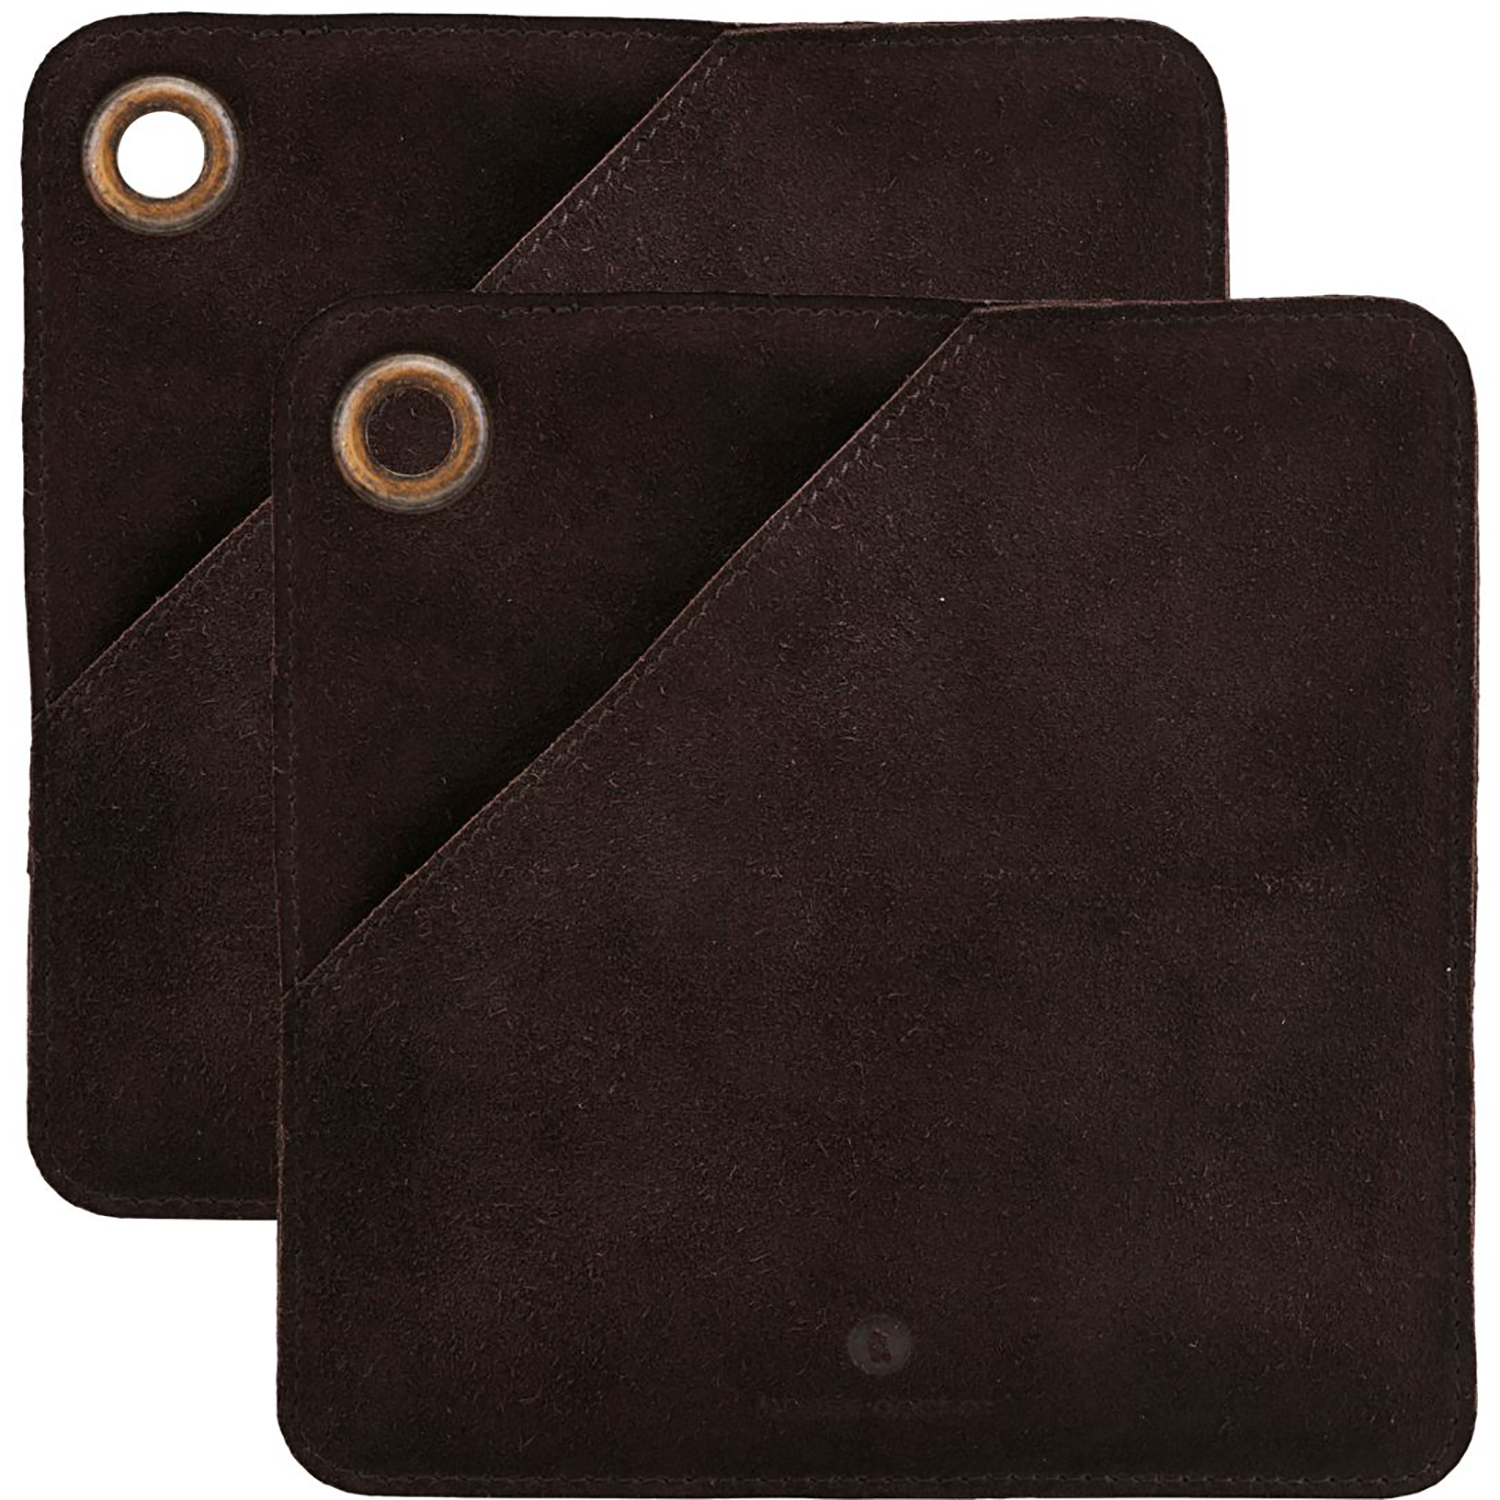 House doctor - Square leather potholder